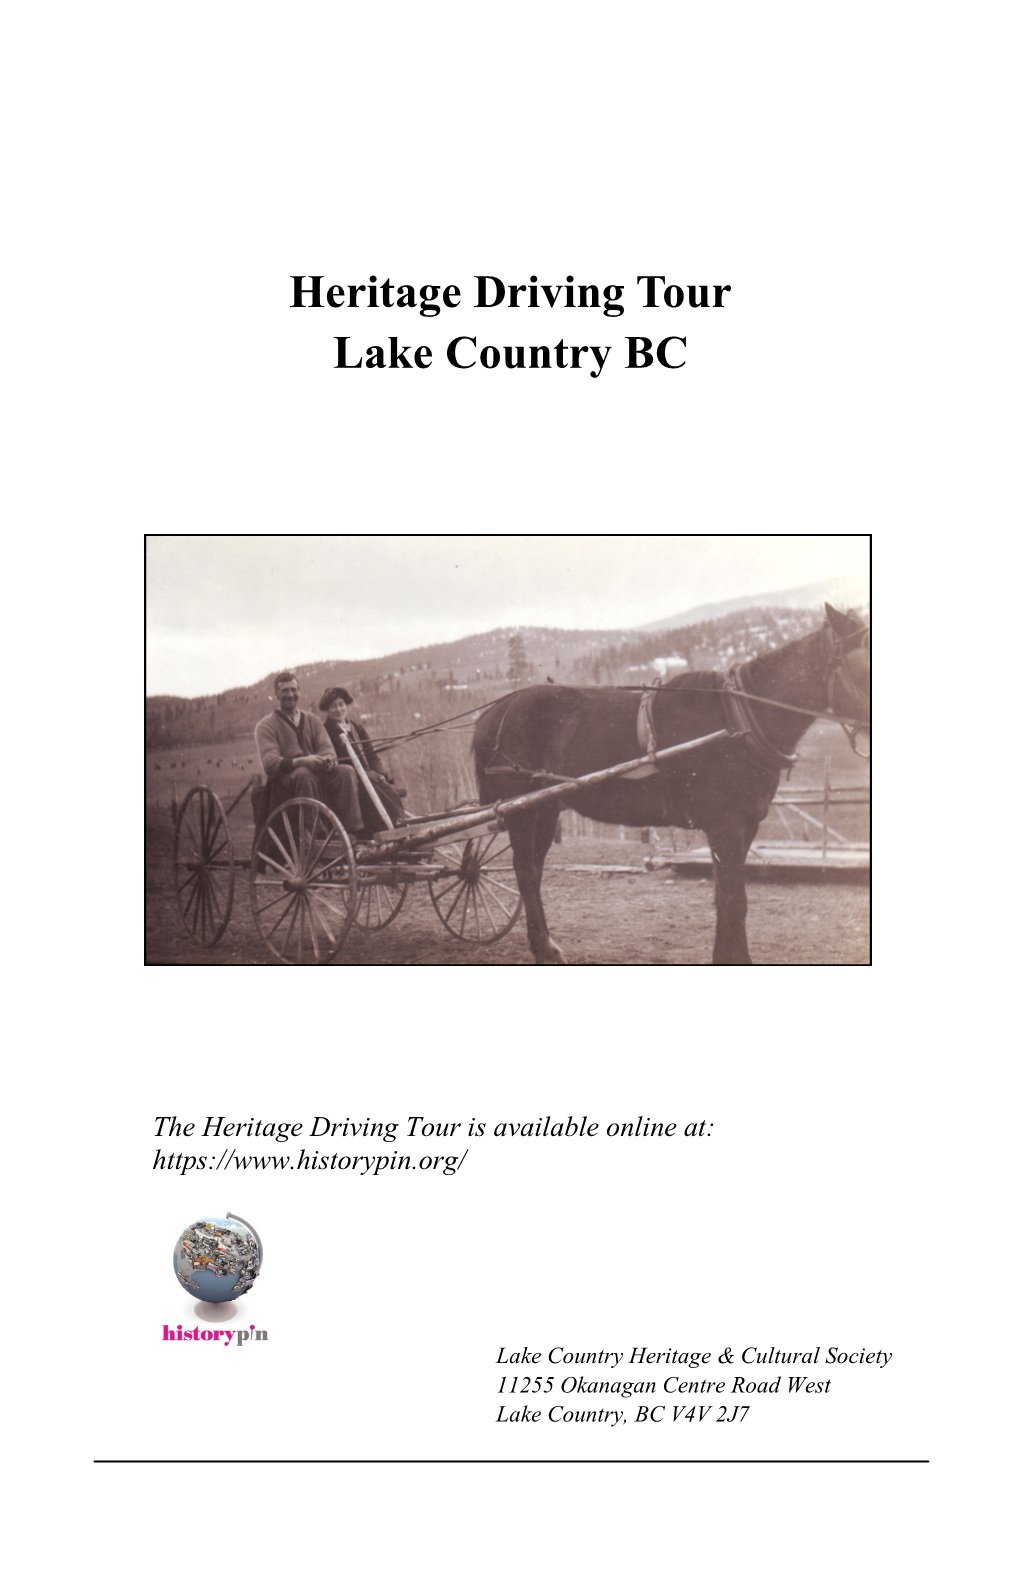 Heritage Driving Tour Lake Country BC